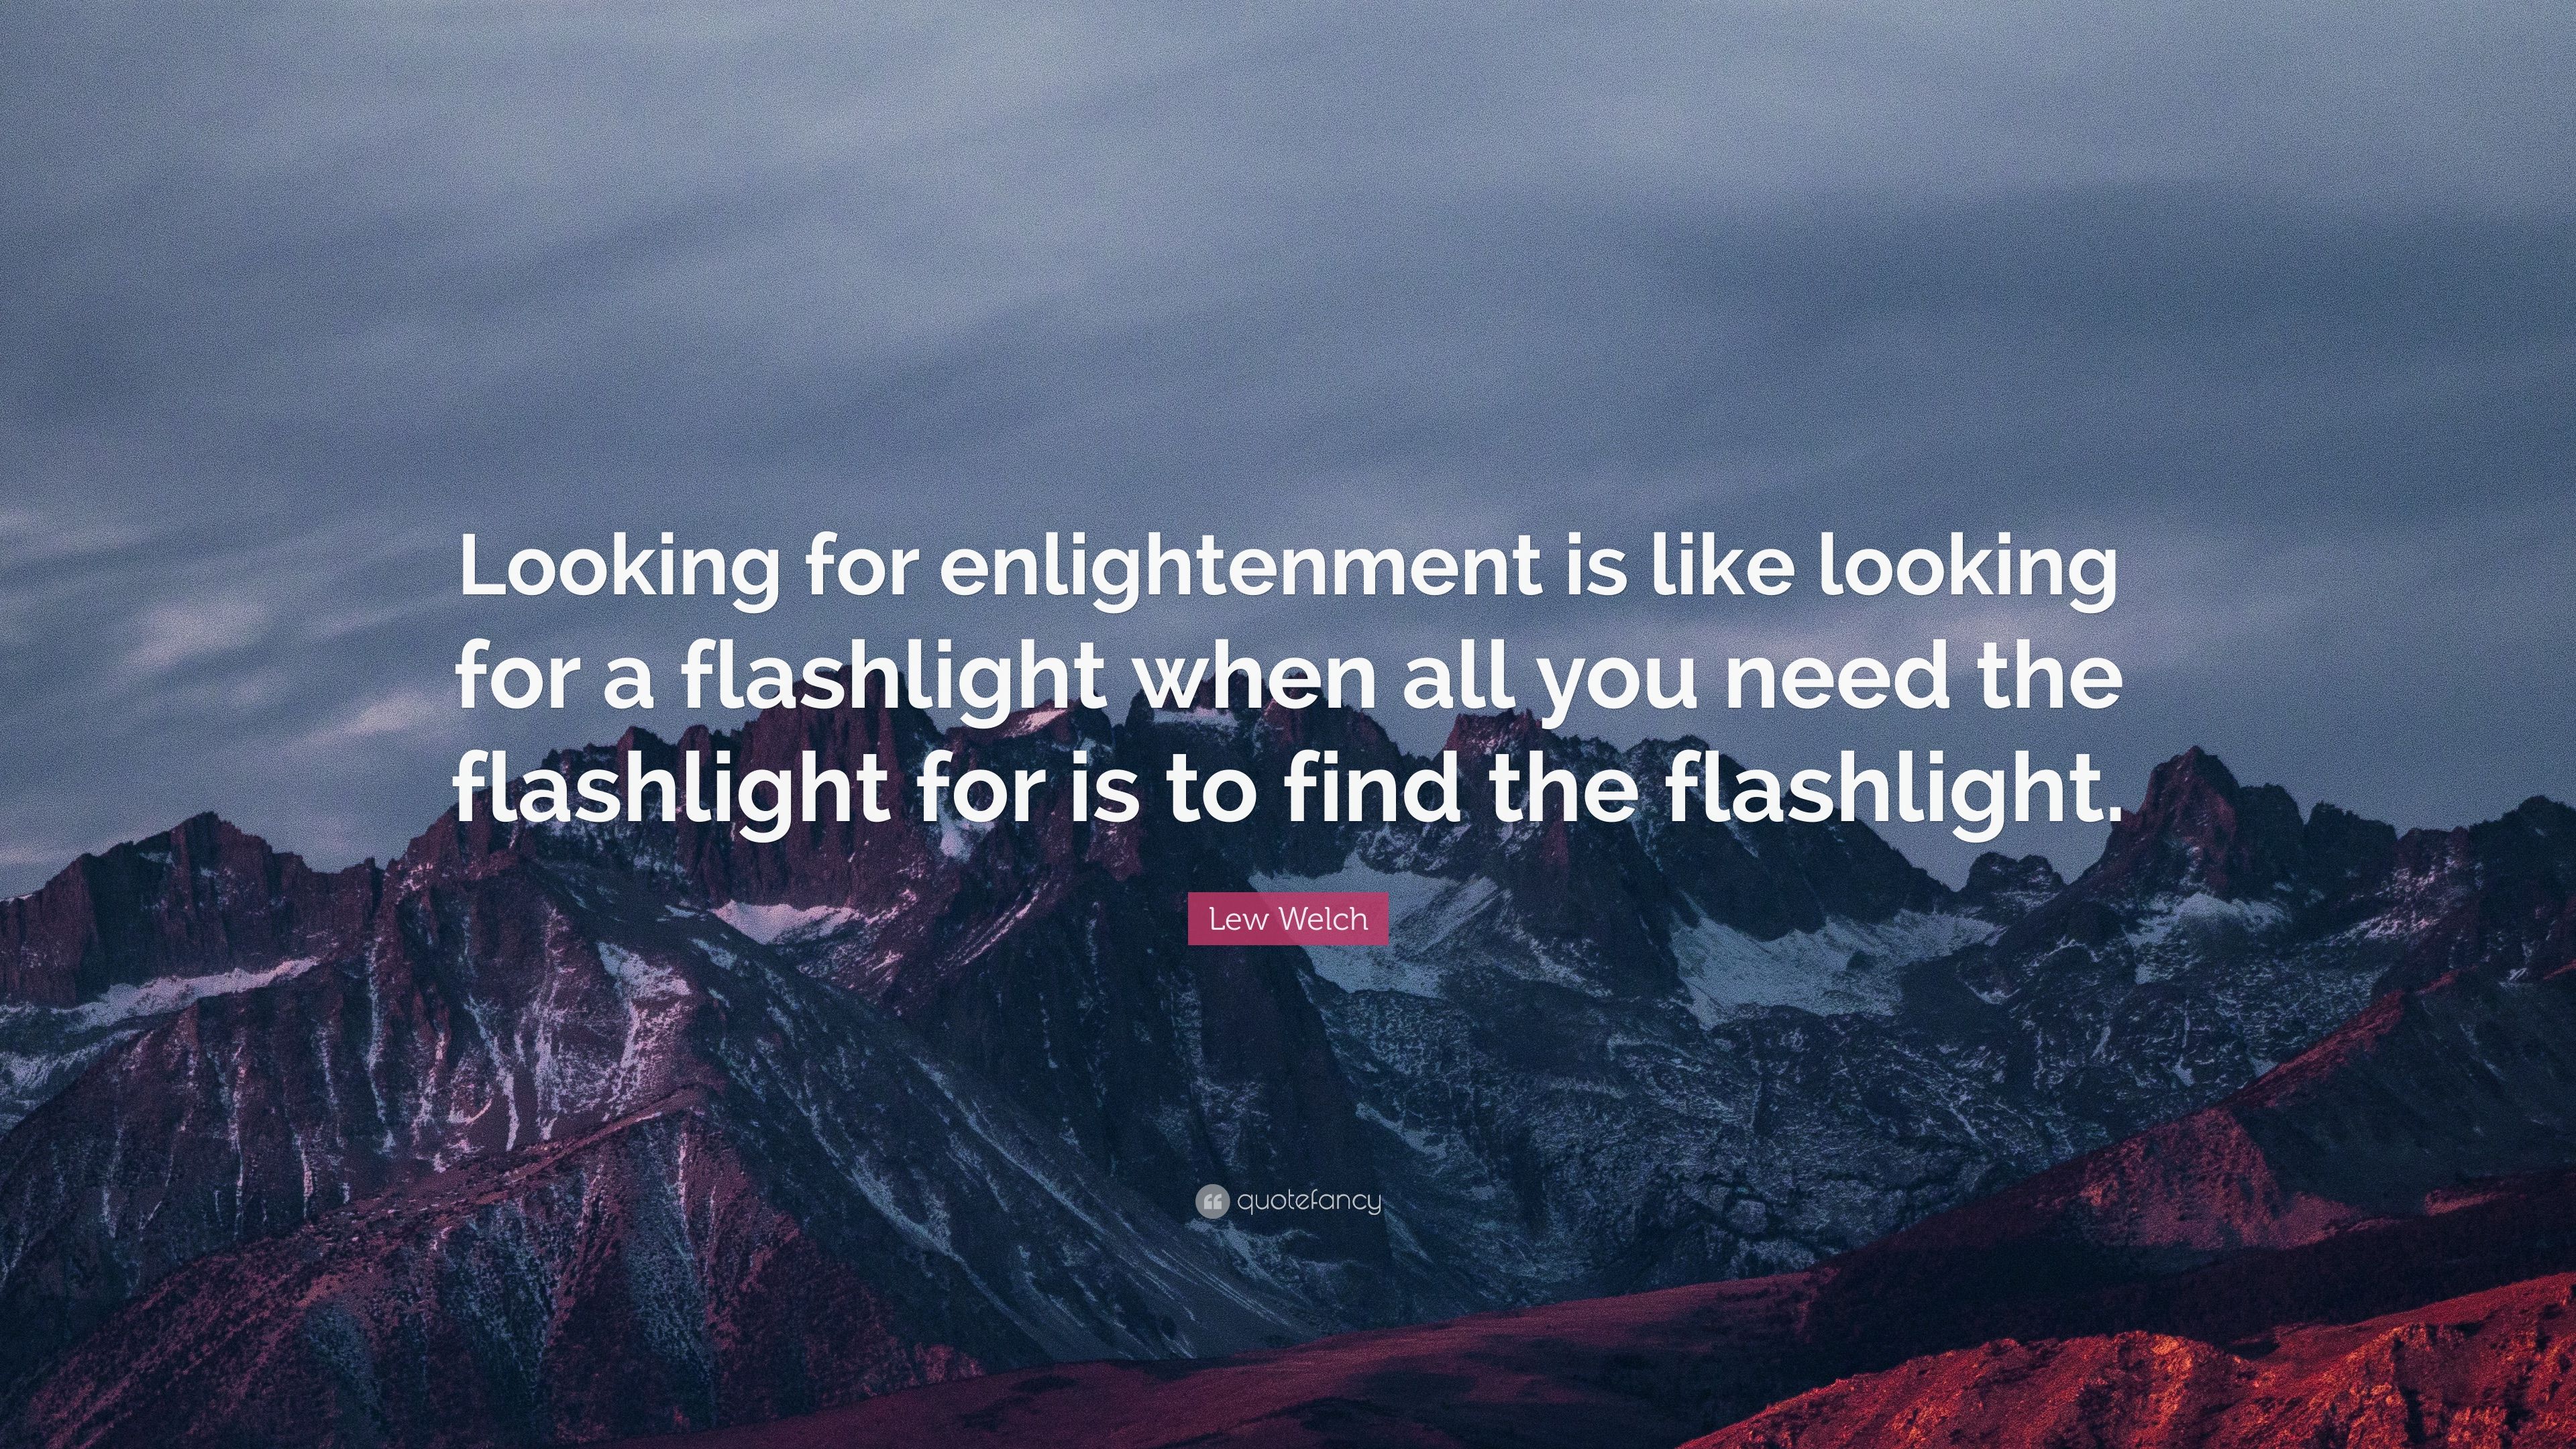 Lew Welch Quote: “Looking for enlightenment is like looking